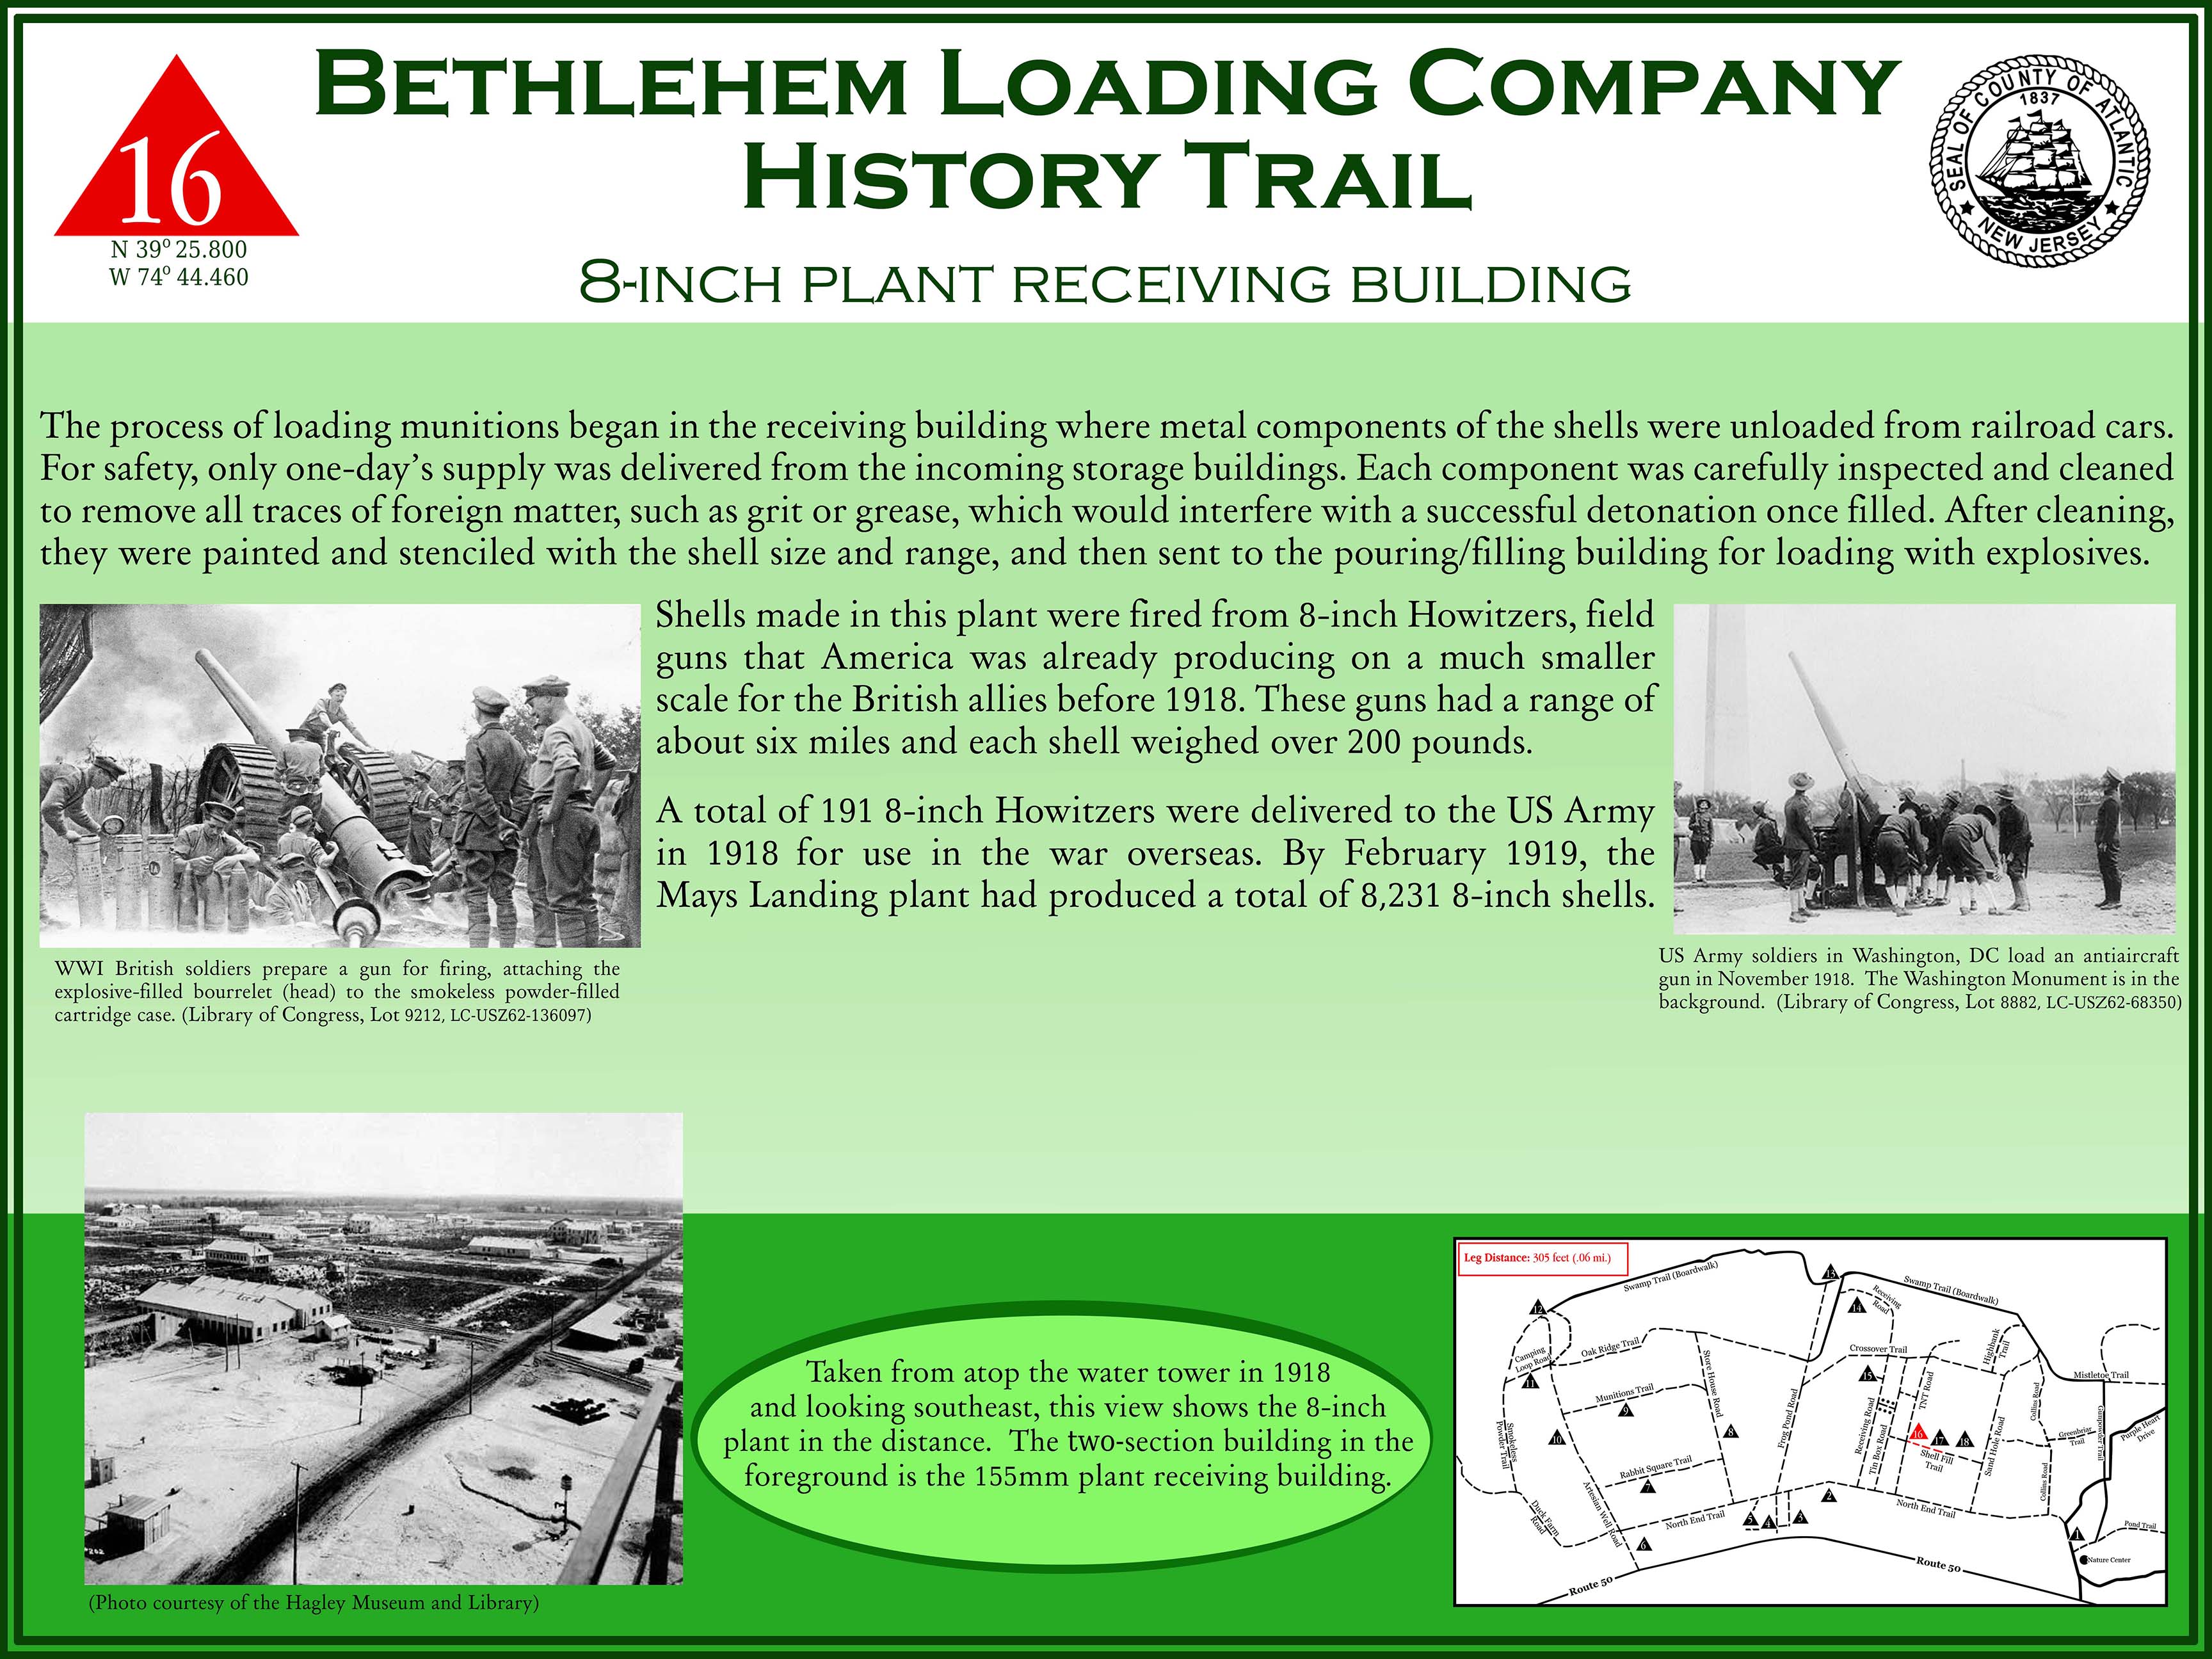 Sign 16 - 8-inch plant receiving building [on TNT road]